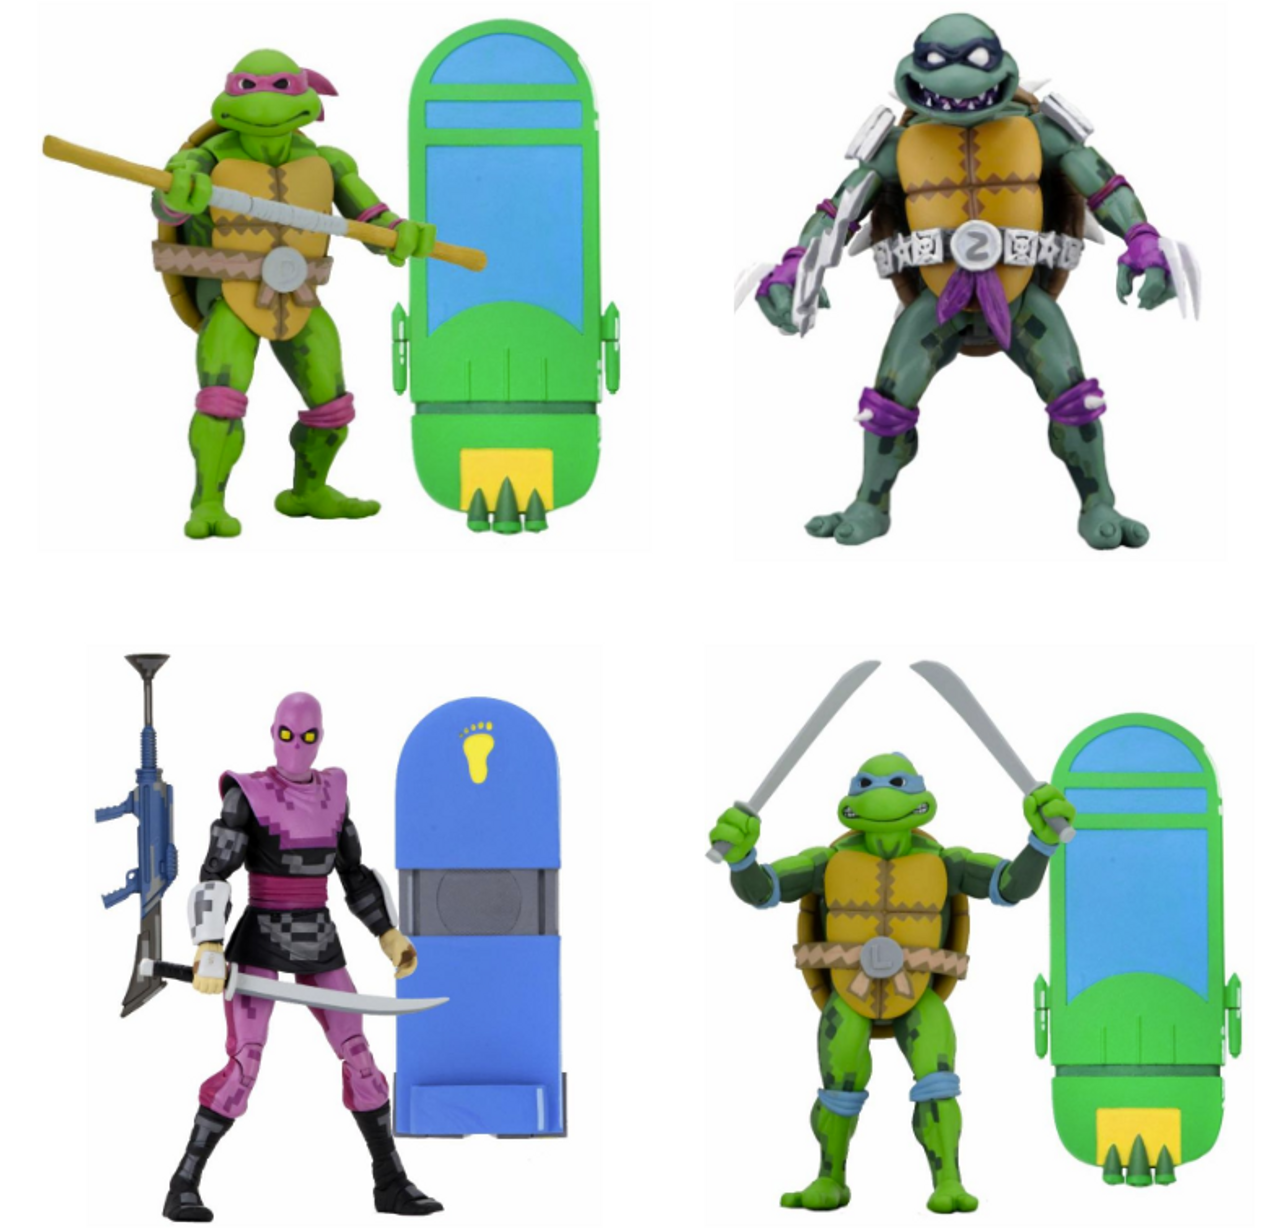 NECA TMNT: Turtles in Time - 7 Scale Action Figures - Series 1 Asst Set of  4